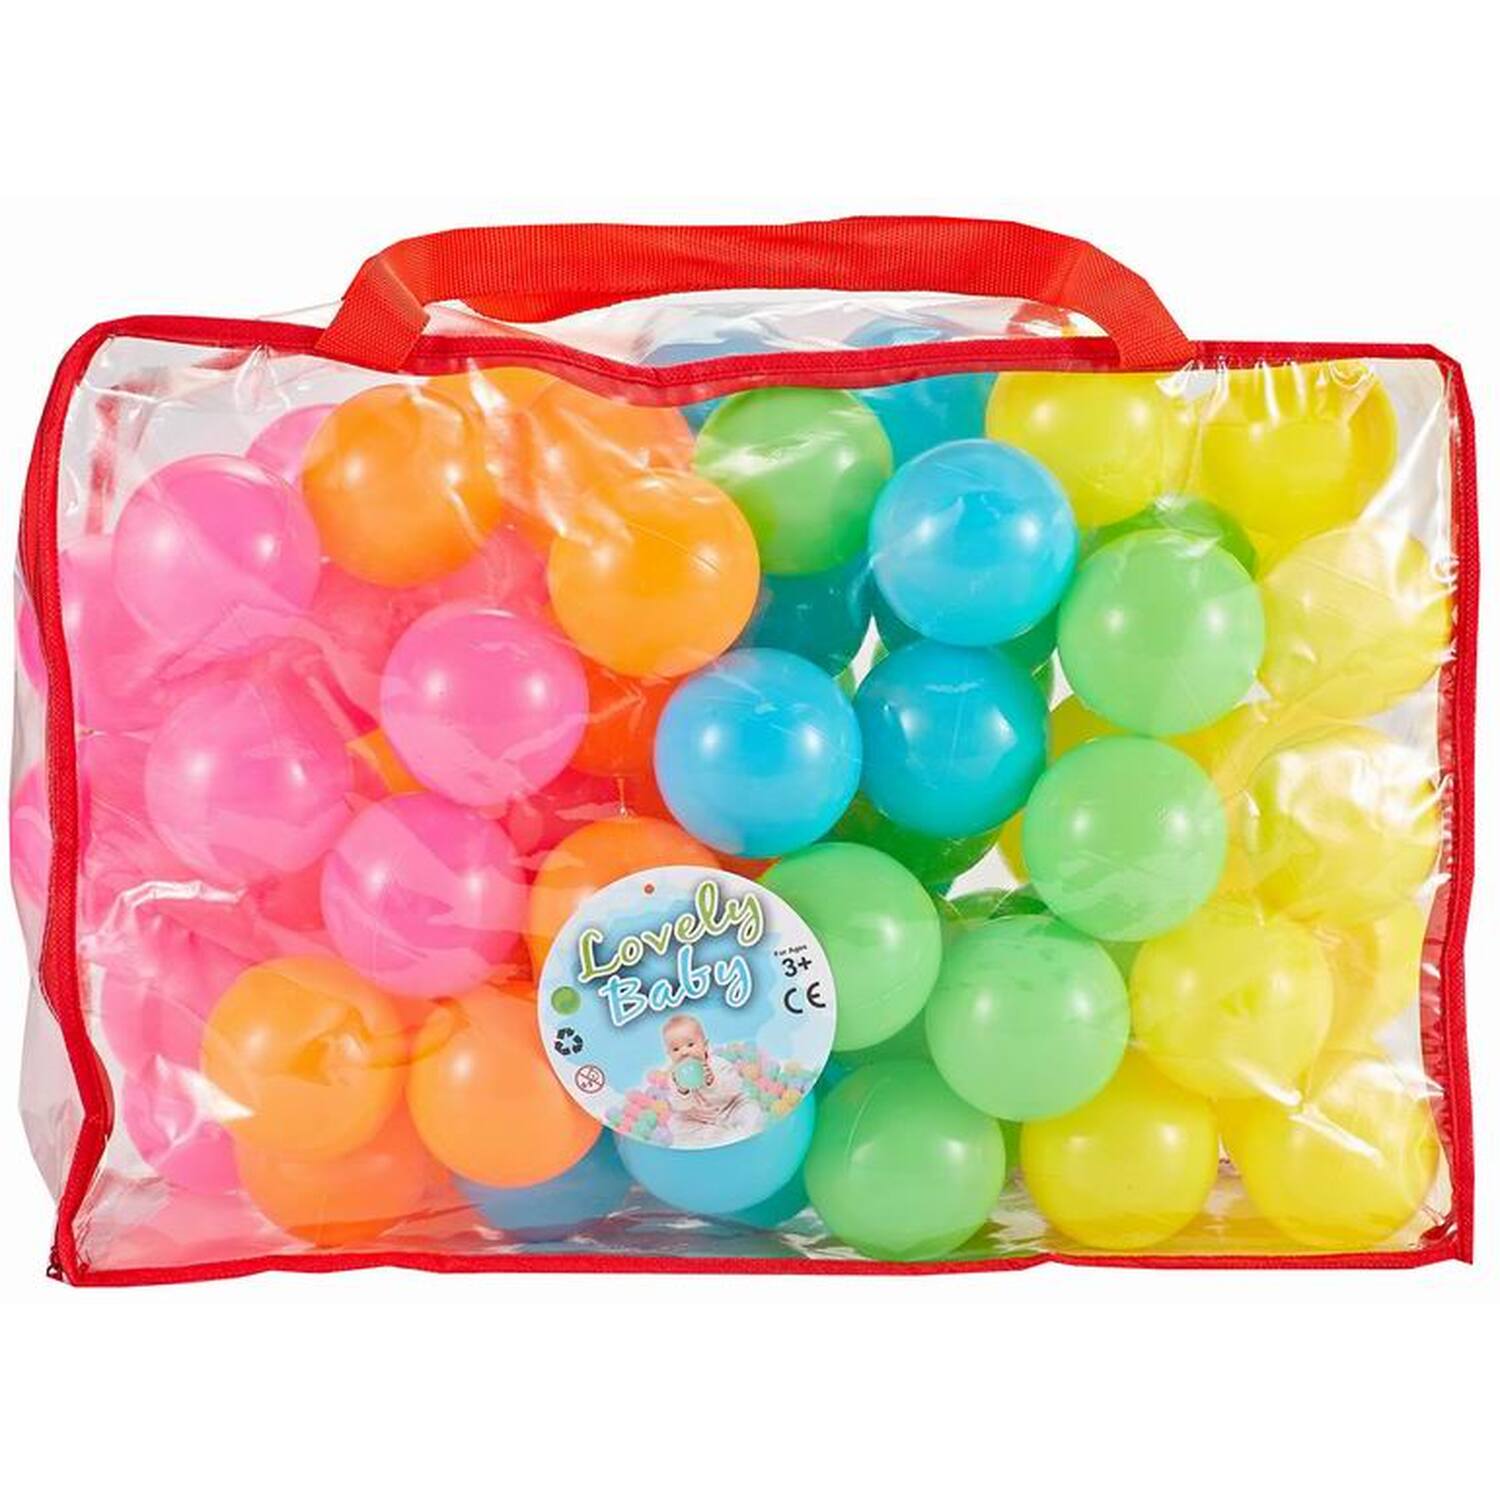 Lovely Baby Play Balls 80 Pack Image